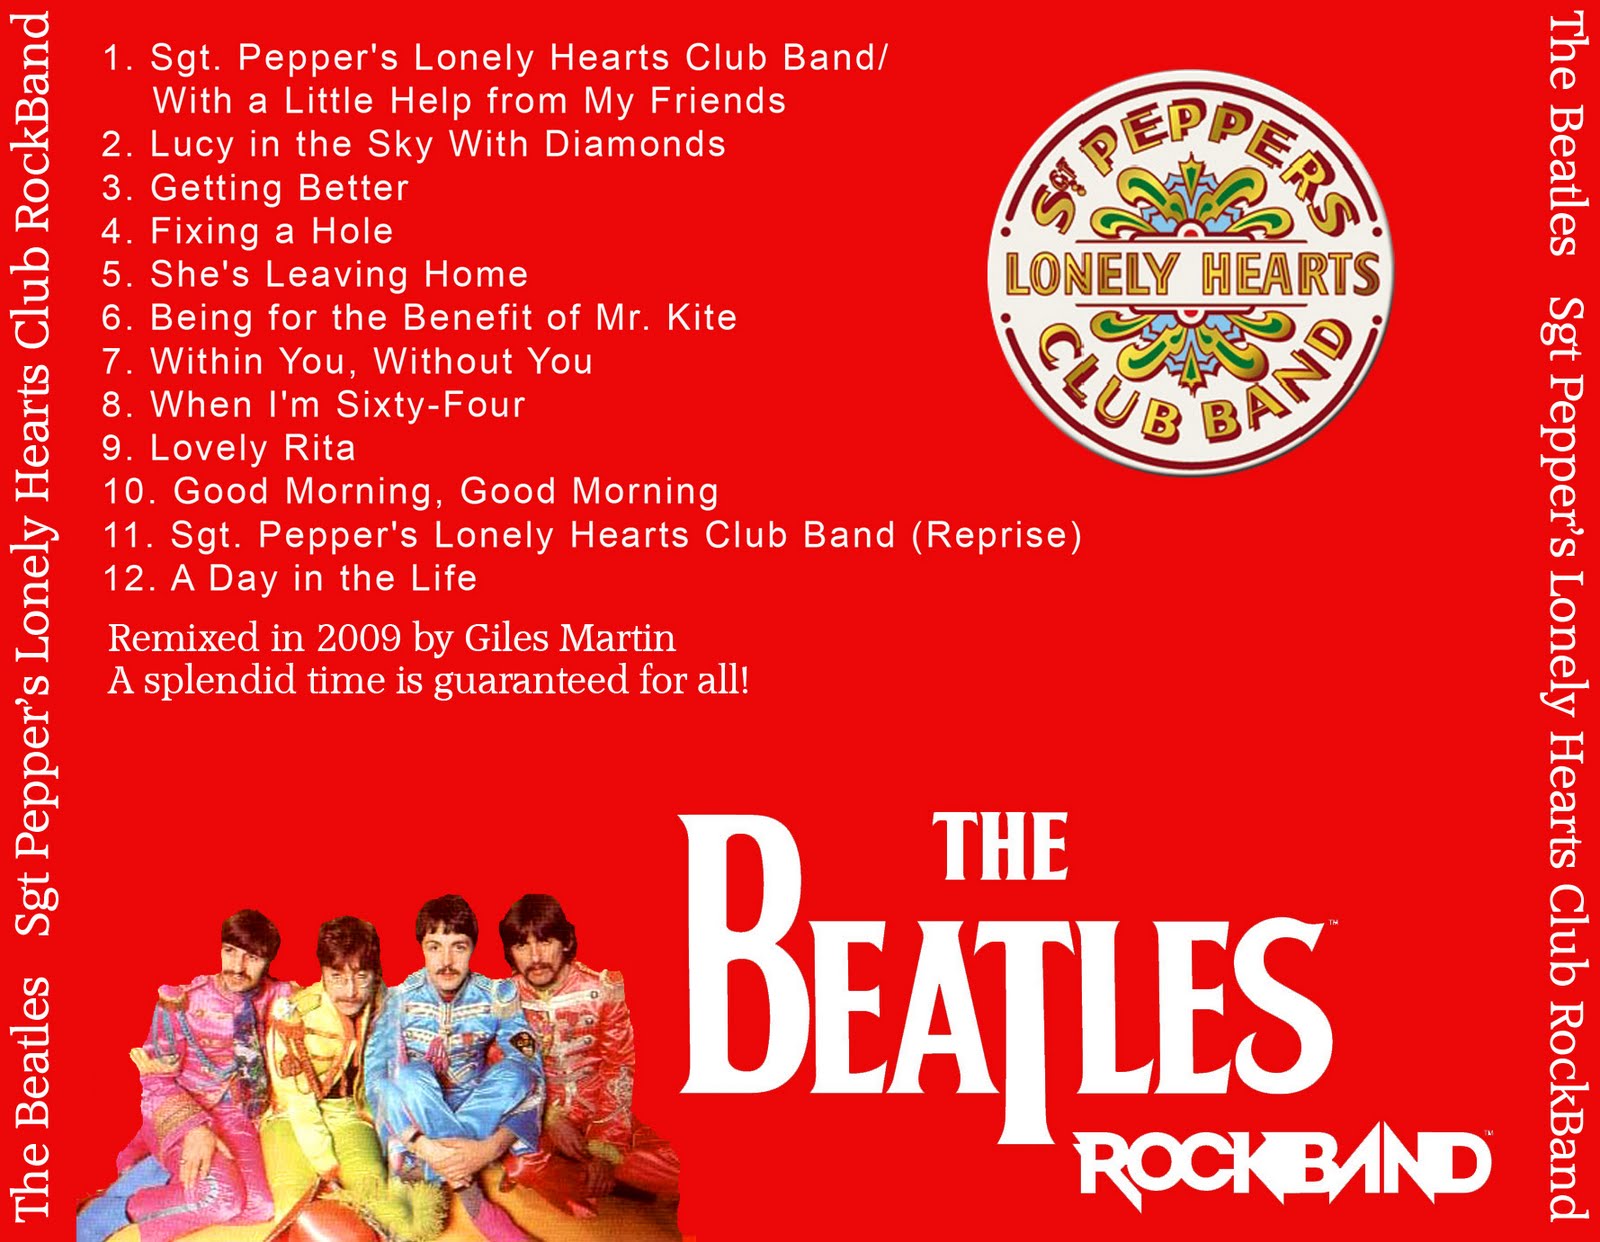 Beatles sgt peppers lonely hearts club. Sgt Pepper's Lonely Hearts Club Band. Sgt Pepper's Lonely Hearts Club Band album Cover. The Beatles Sgt. Pepper's Lonely Hearts Club Band 1967. Sgt. Pepper's Lonely Hearts Club Band CD.